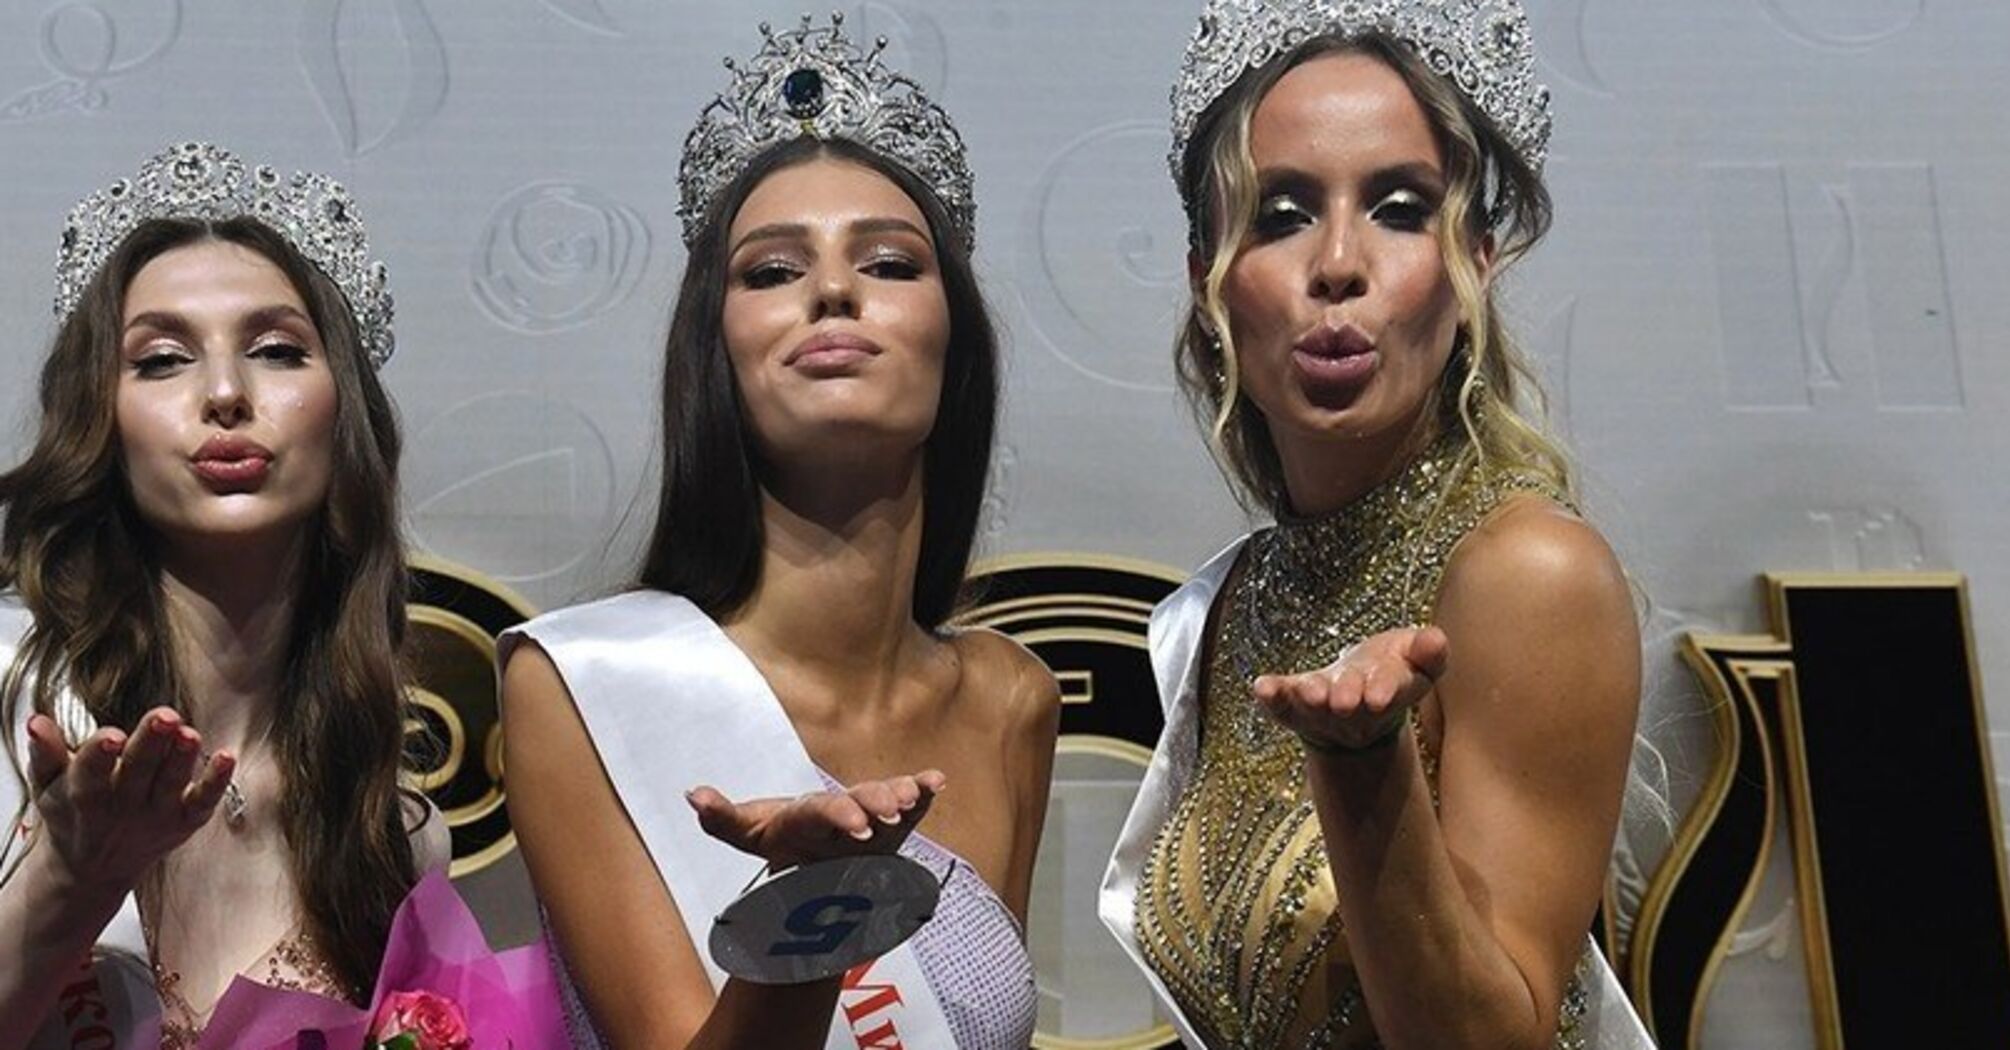 Irresponsible preparation and careless attitude: users mock Miss Moscow pageant 